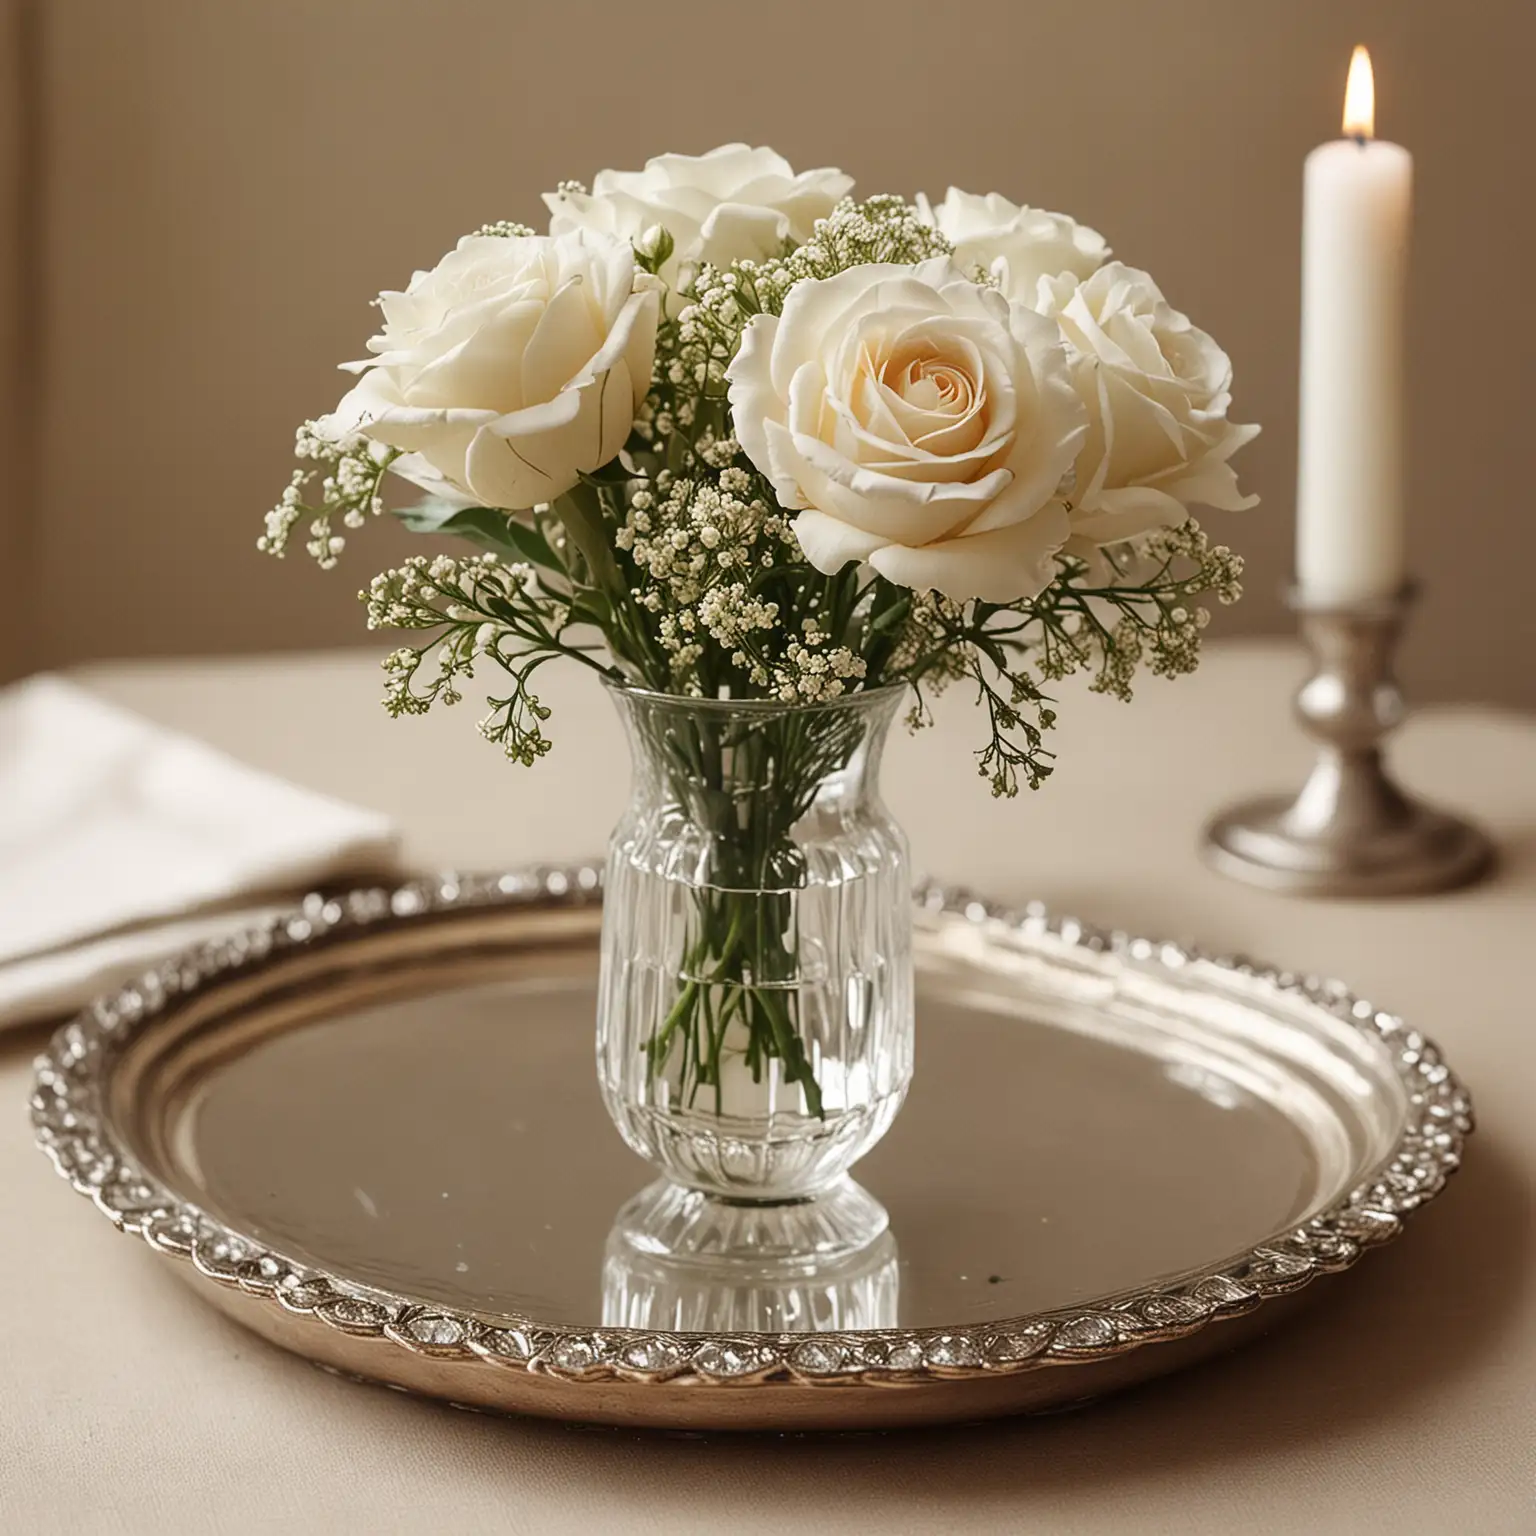 vintage centerpiece with a small antique tray holding an antique crystal bud vase with one singular ivory rose accented with baby's breath; keep background neutral;